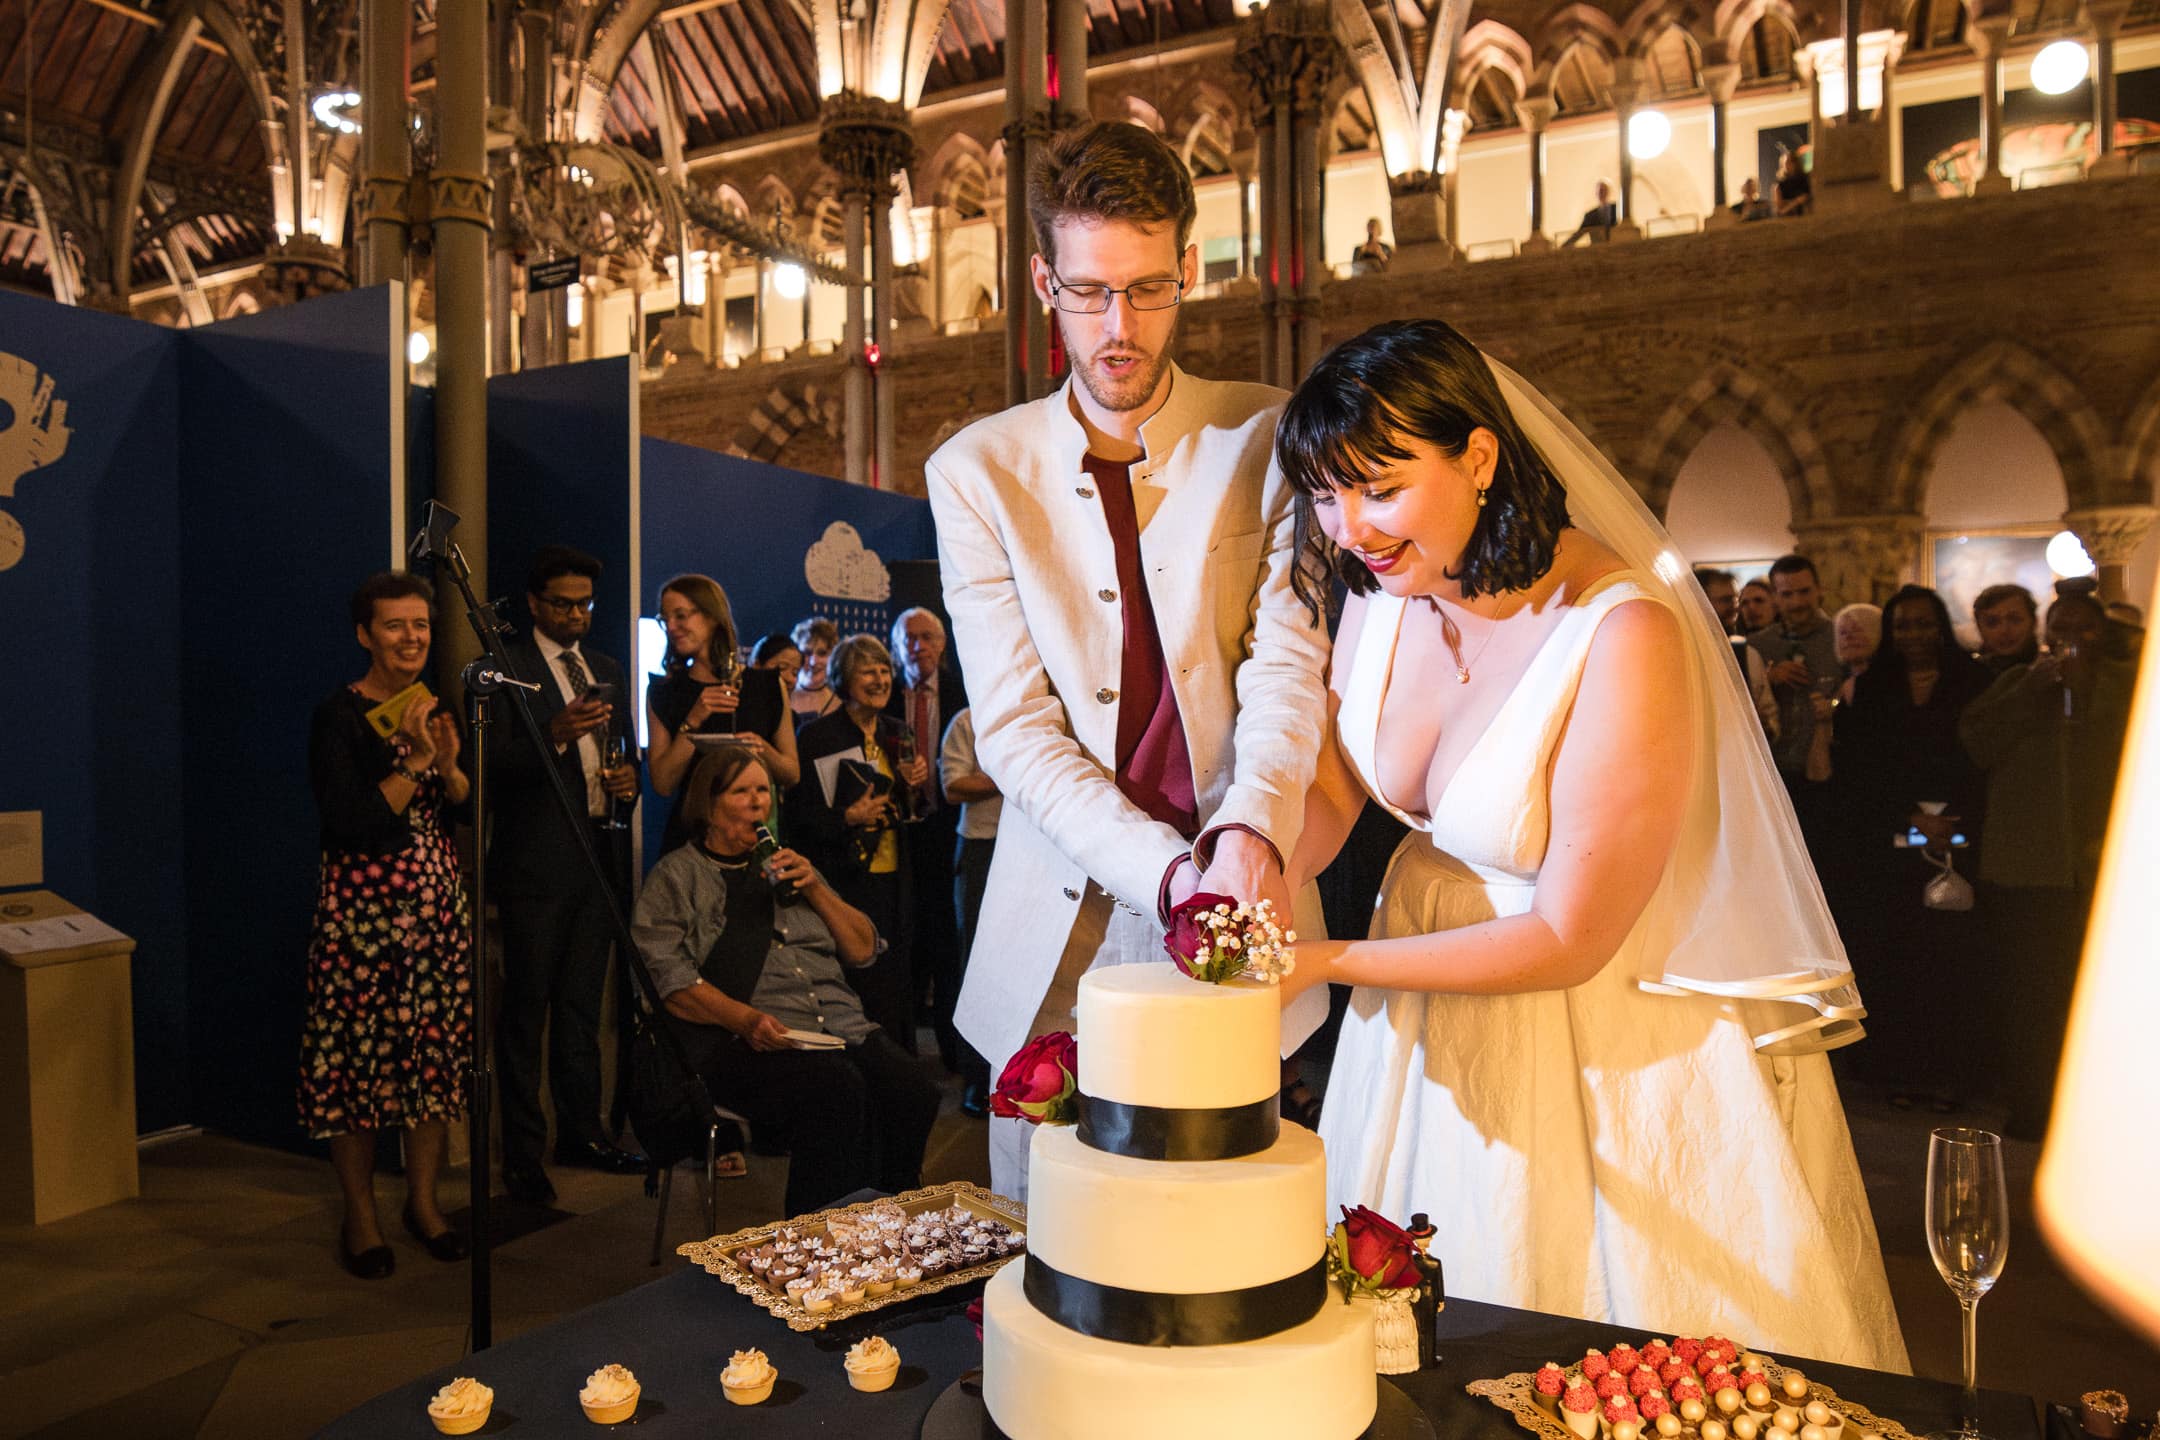 Cutting the cake at the Oxford Natural History Museum wedding reception